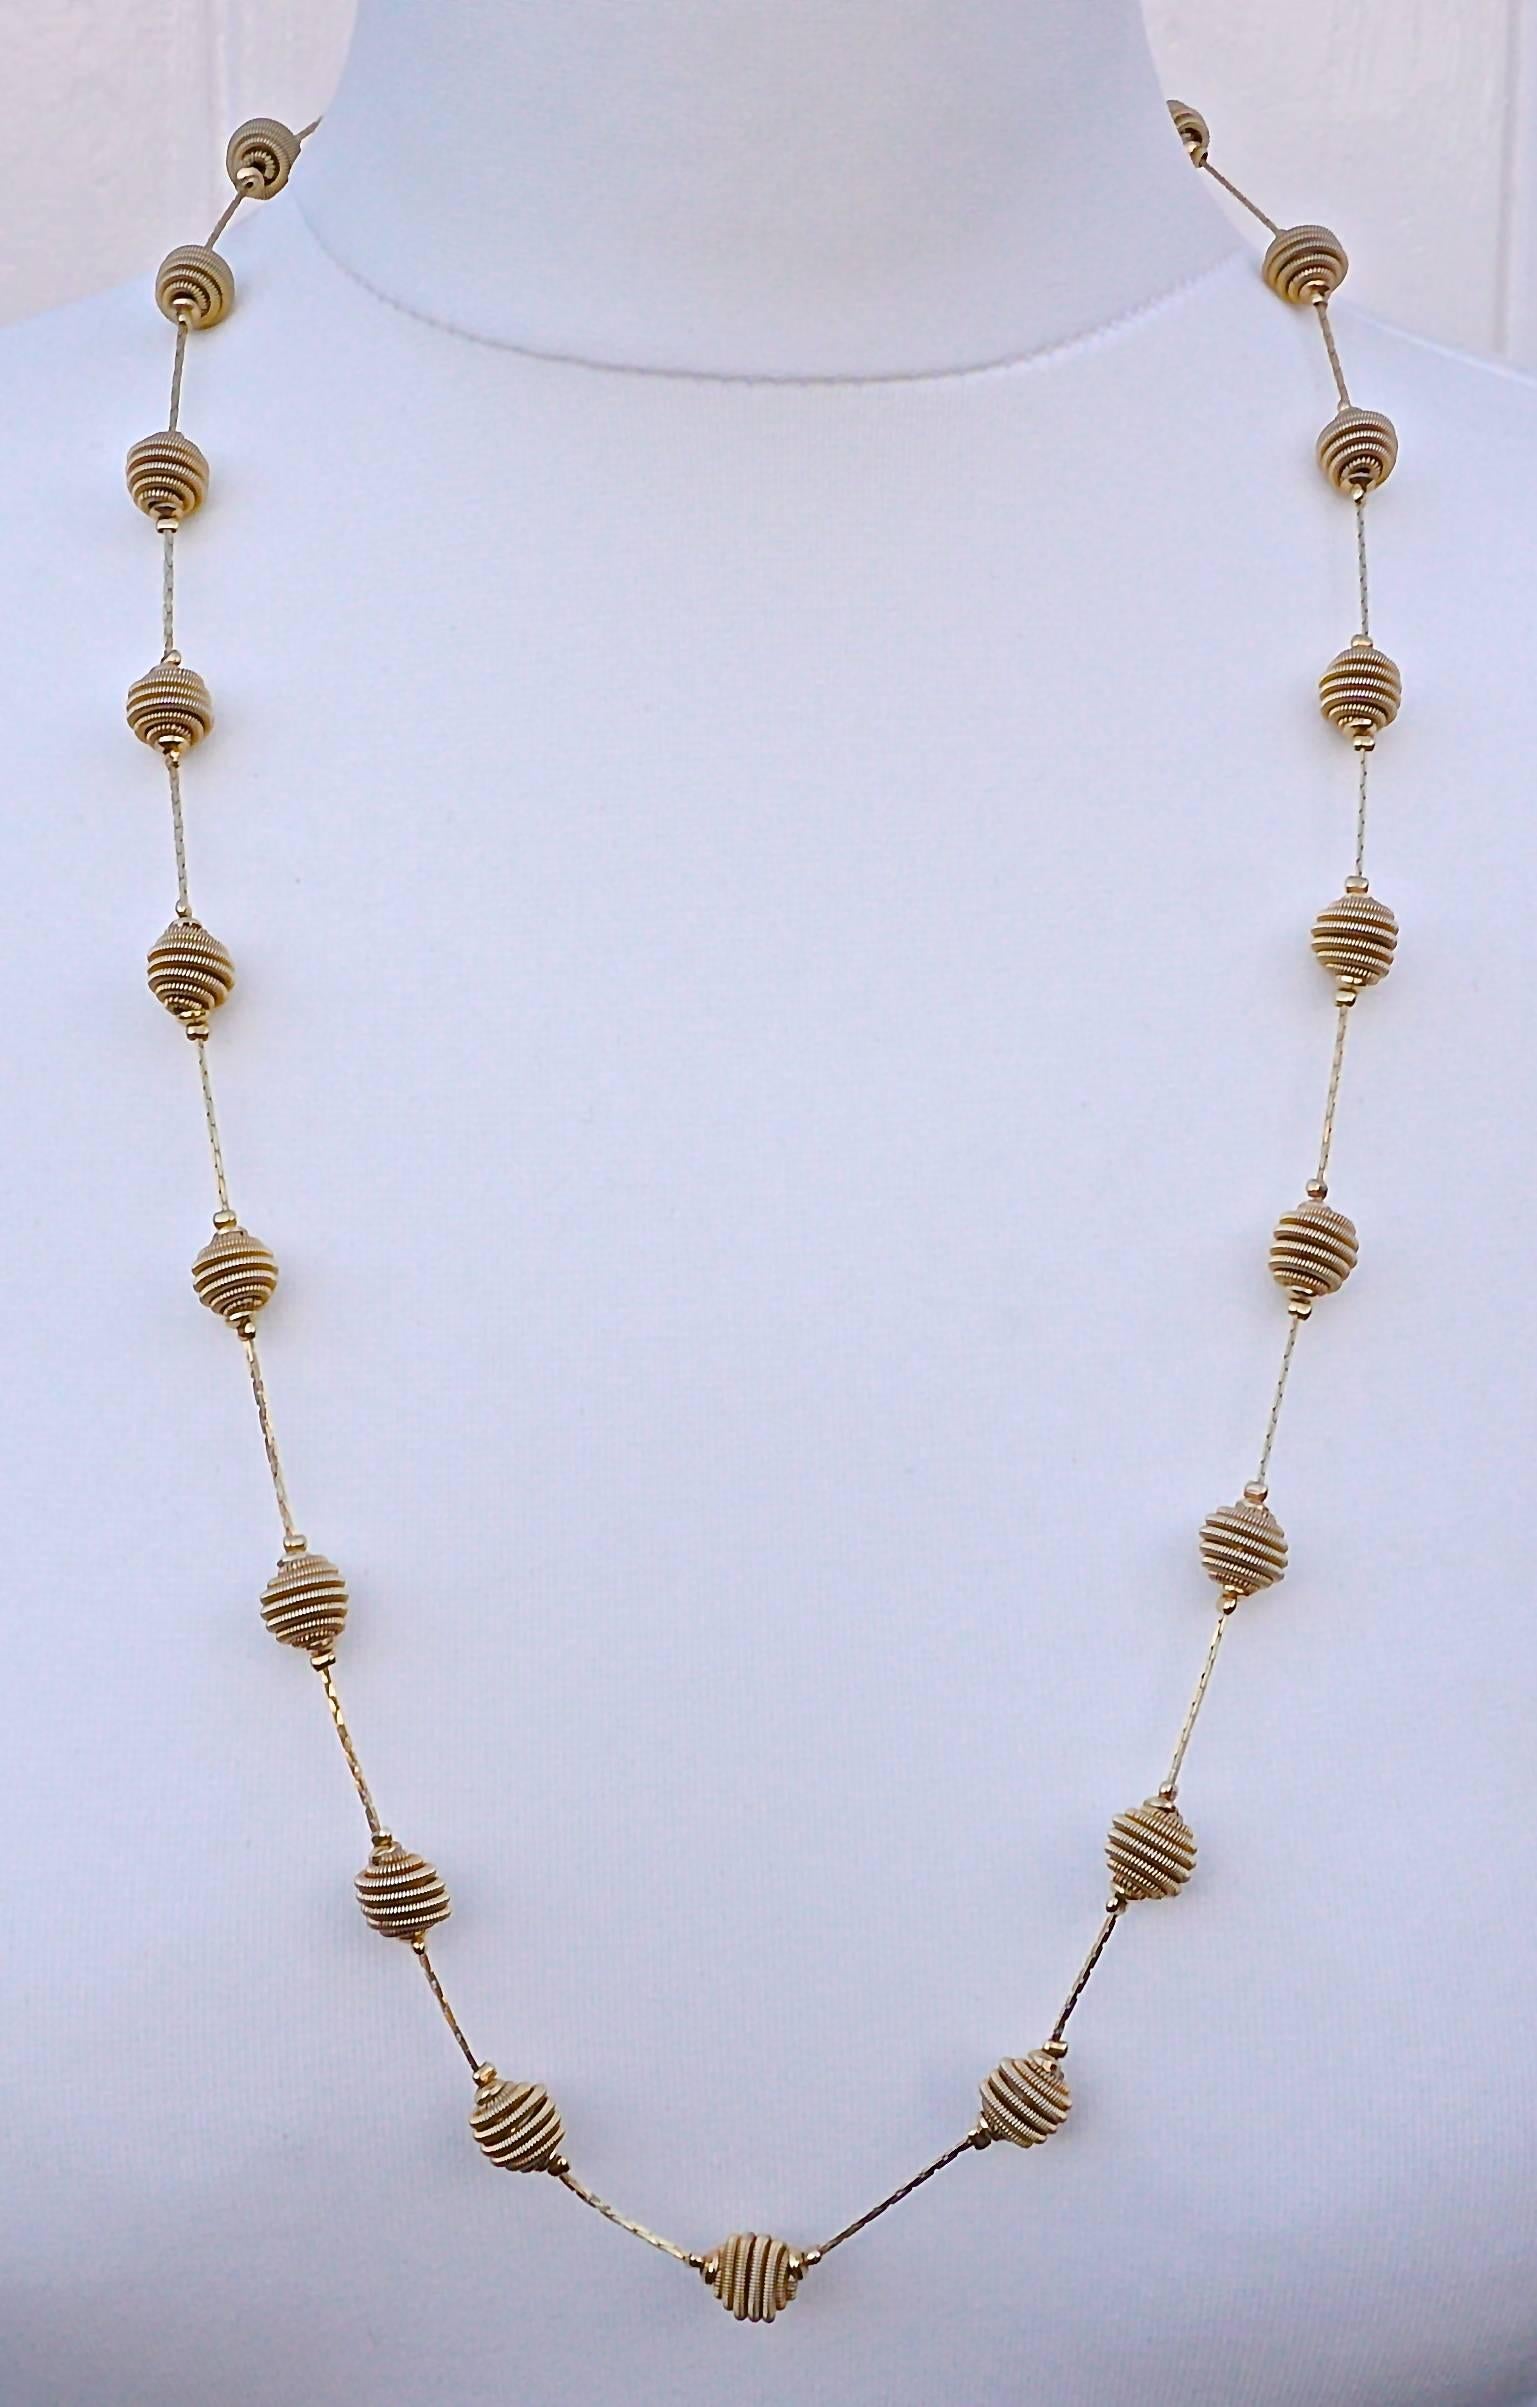 Fabulous Monet gold tone necklace with spiral balls joined together with shiny linked chain. It has the Monet hang tag. Length 76.5cm, 30 inches, and the spiral balls are diameter 1cm, .39 inch. This Monet design has been reinvented and is available